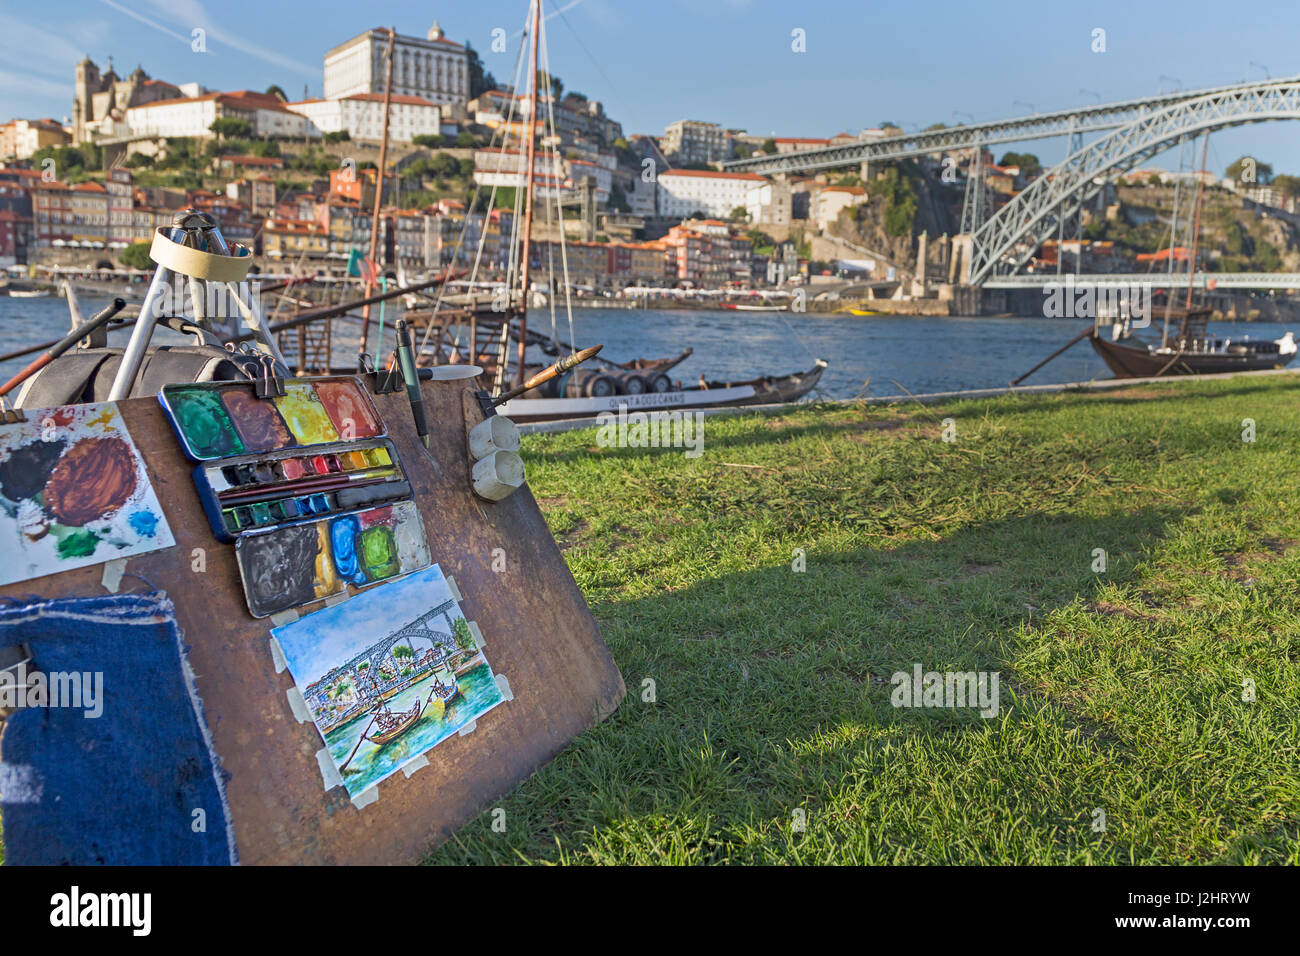 Painter in front of Rabelo boats, port wine boats on the Rio Douro, Douro River, Porto, Portugal, Germany Stock Photo